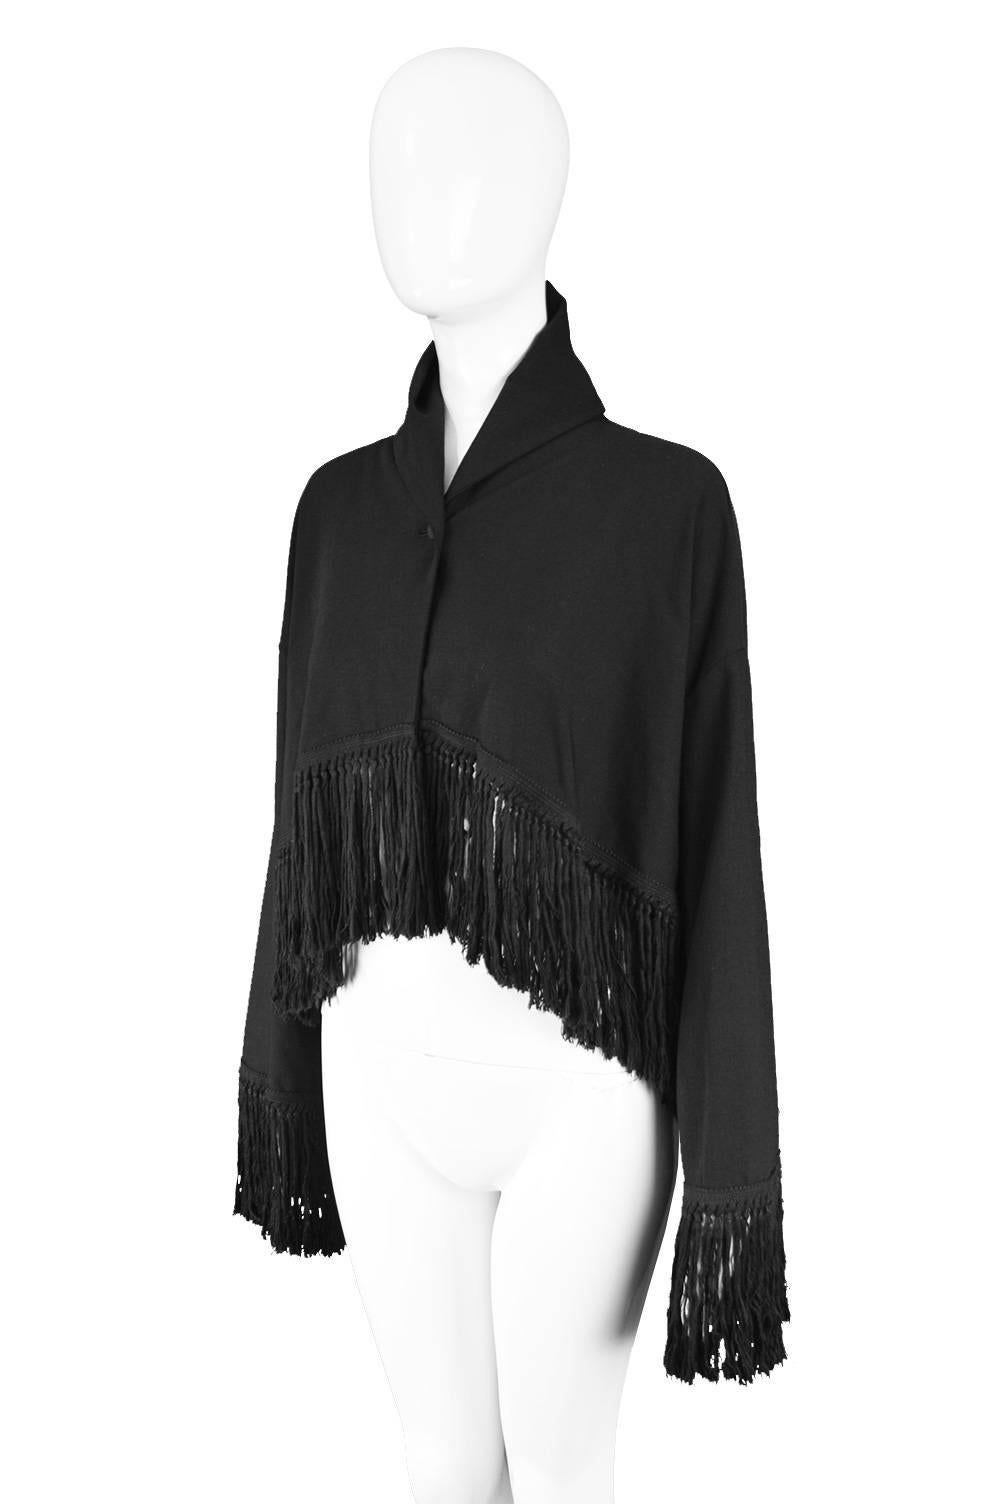 Women's Romeo Gigli for Callaghan Knotted Fringed Black Stretch Wool Jacket, 1990s  For Sale